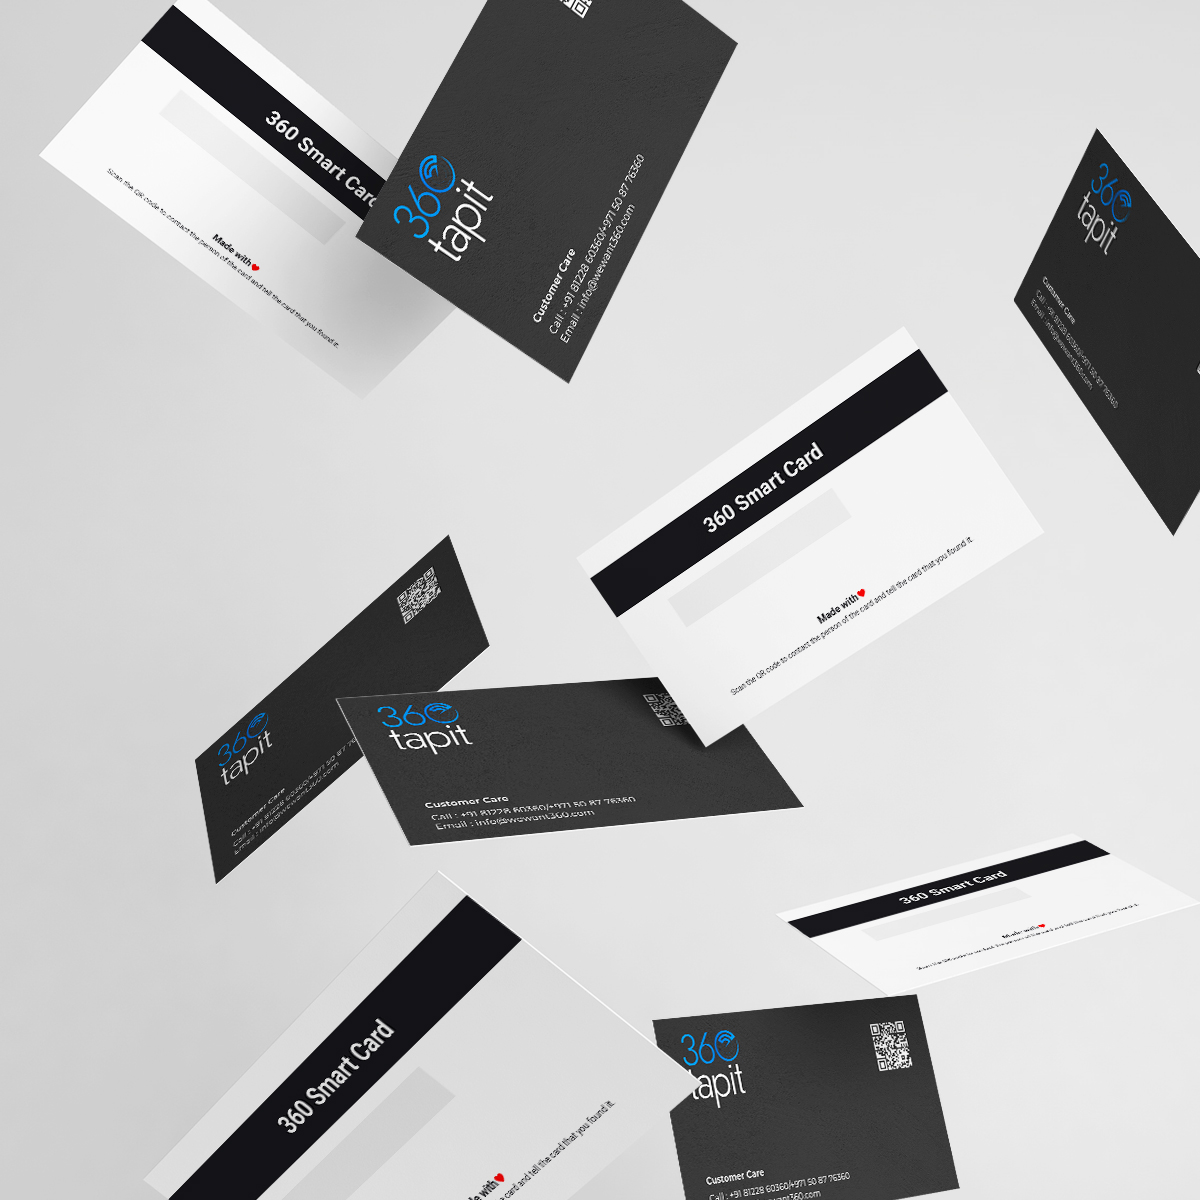 What is 360Tapit Business Card? - KSA